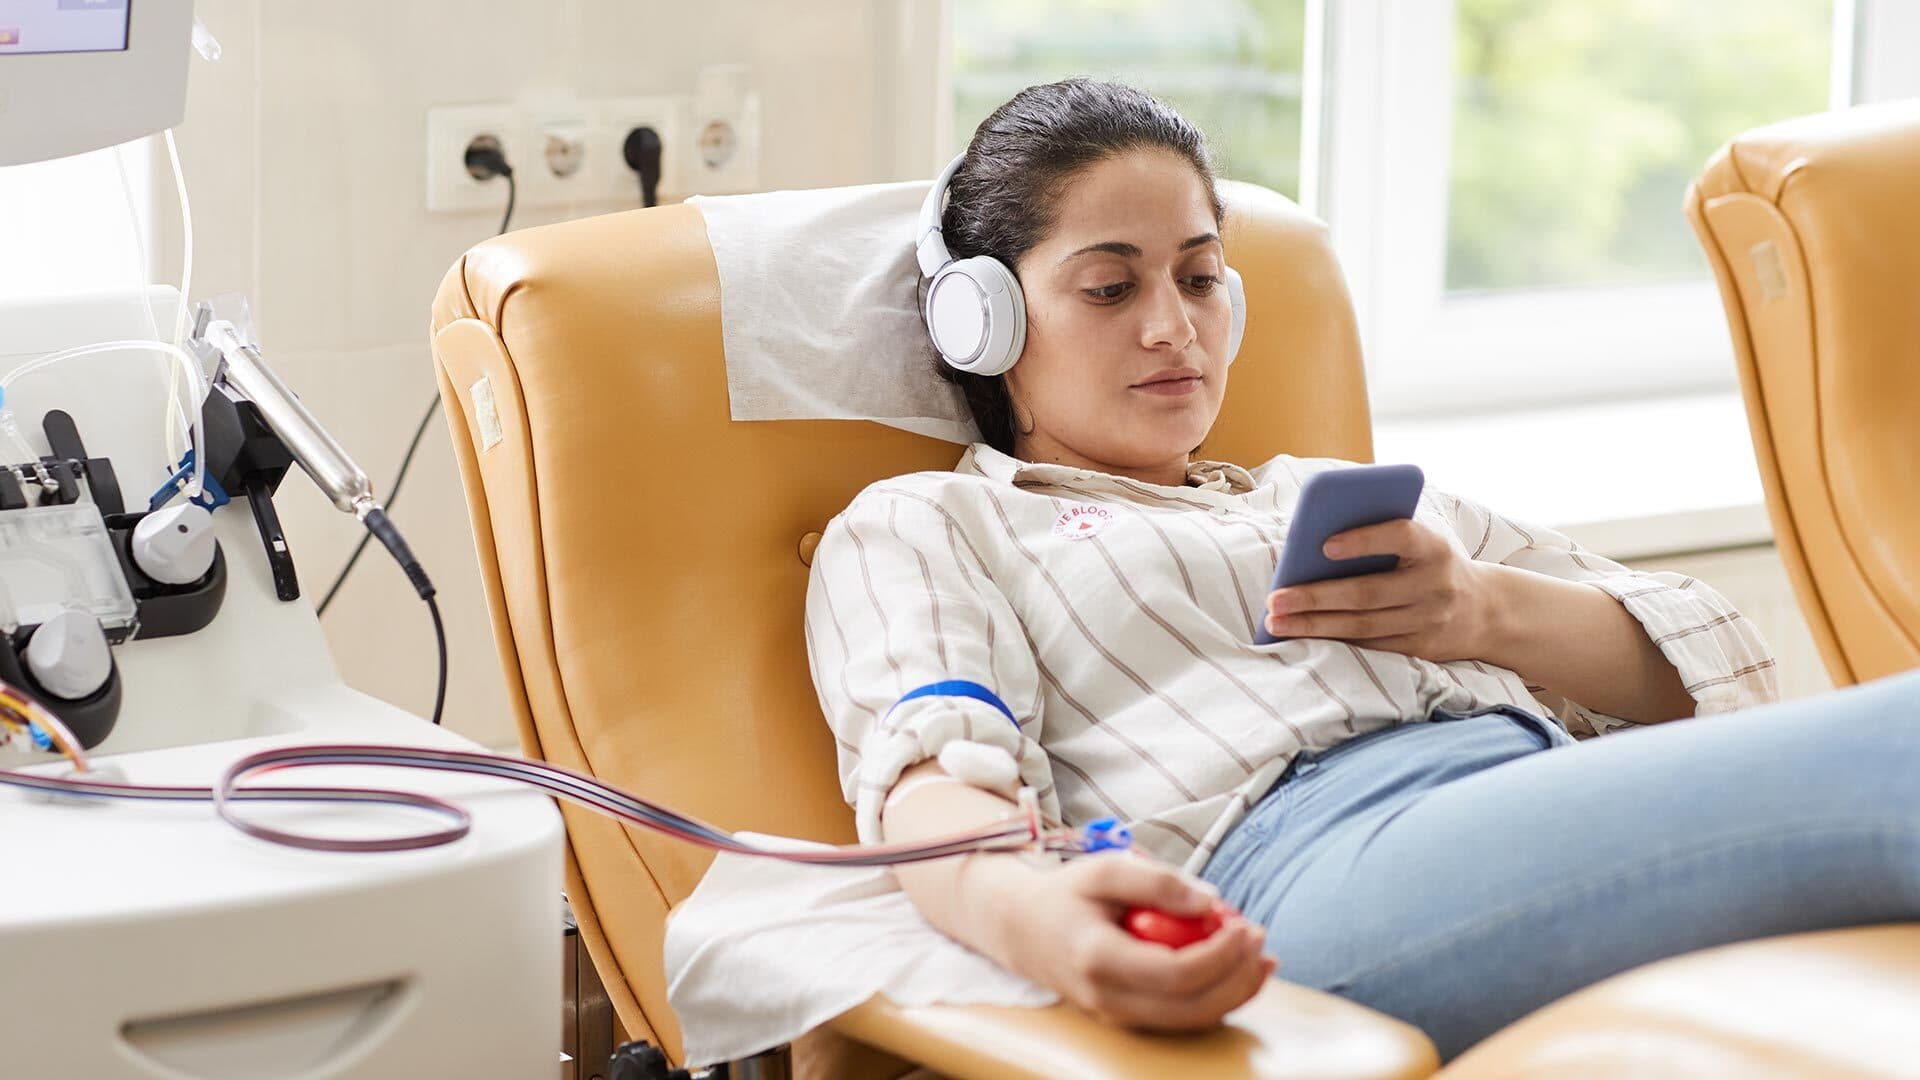 Woman looks at smartphone while giving blood